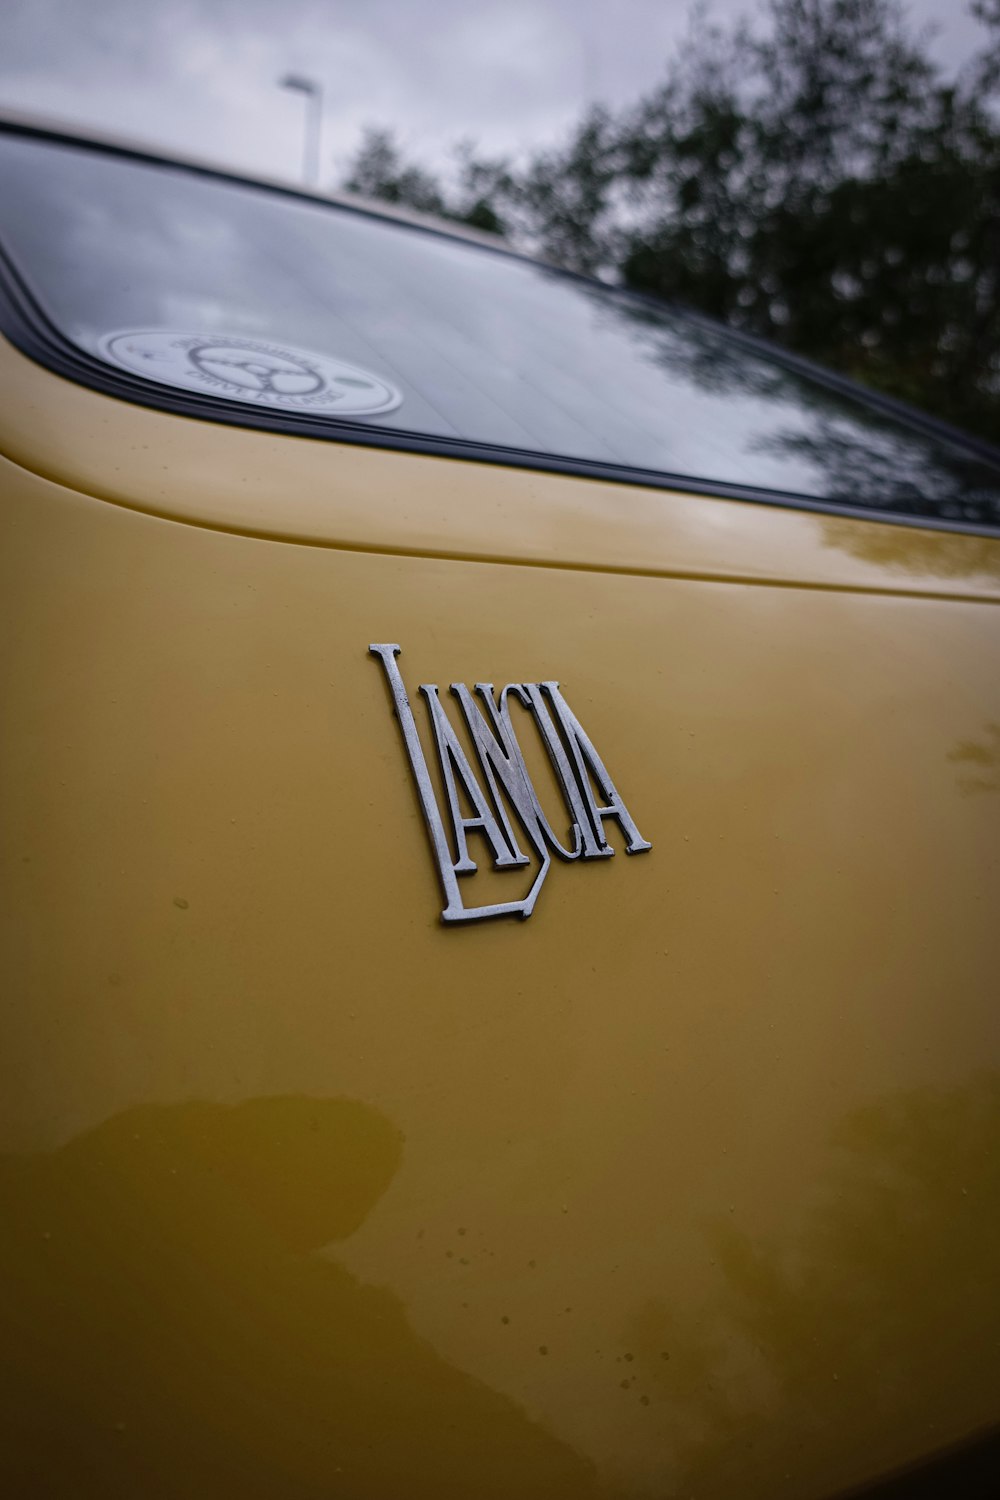 a close up of the front of a yellow car